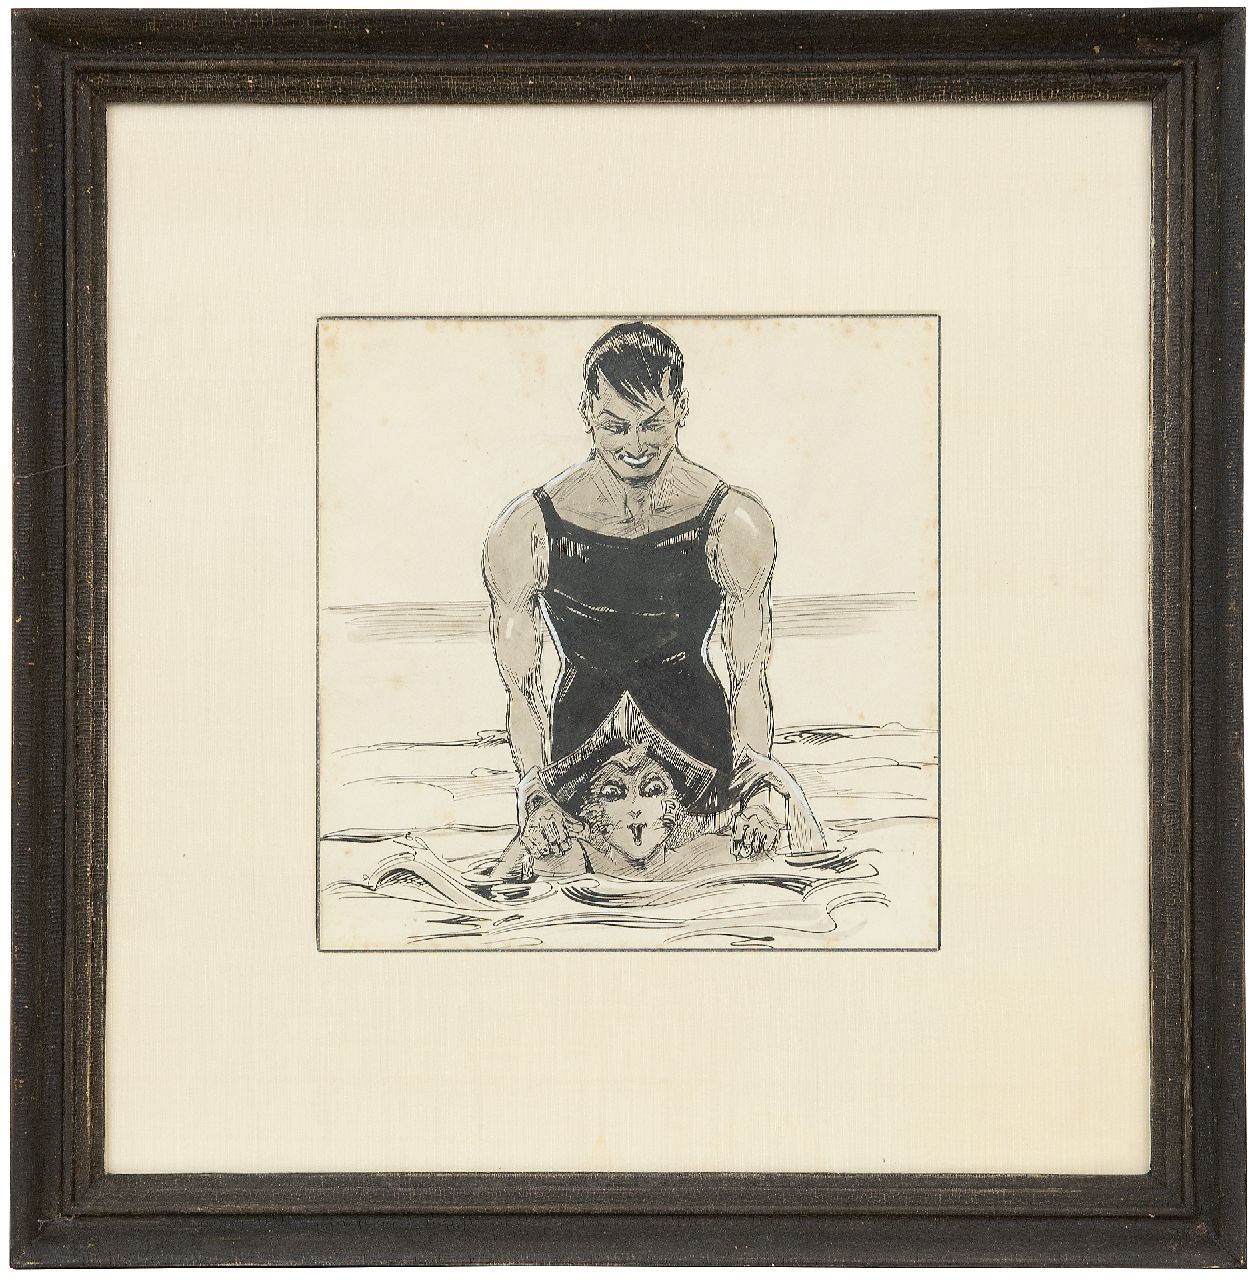 Jung C.H.  | Carel Hendrik 'Carlo' Jung | Watercolours and drawings offered for sale | Getting a dip, Indian ink on paper 25.0 x 23.0 cm